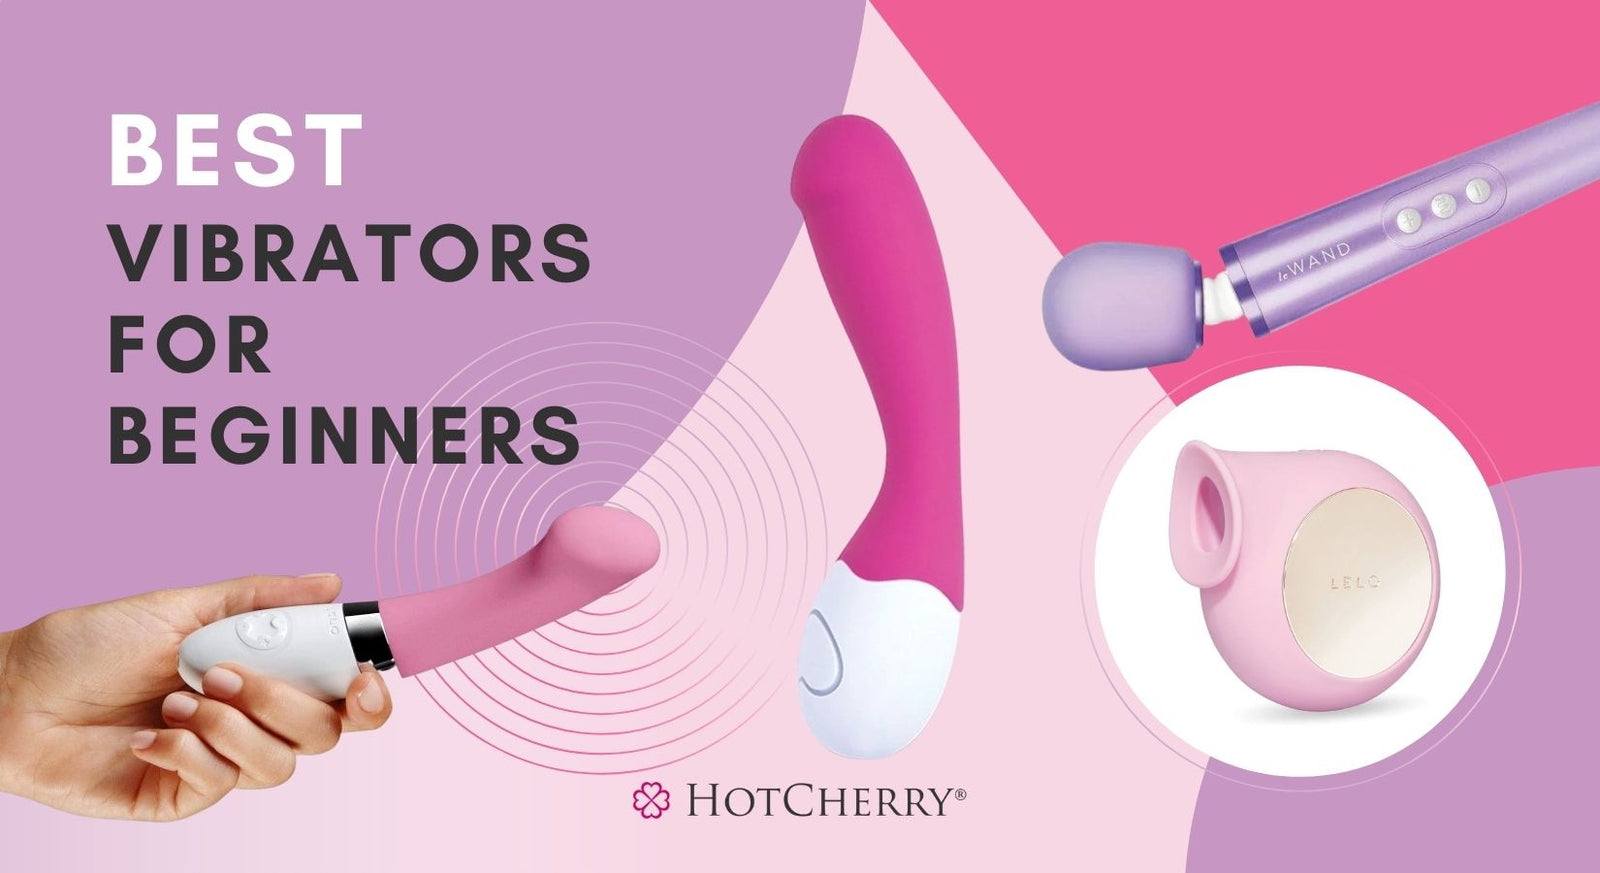 15 Best Vibrators for Beginners According to Sexperts